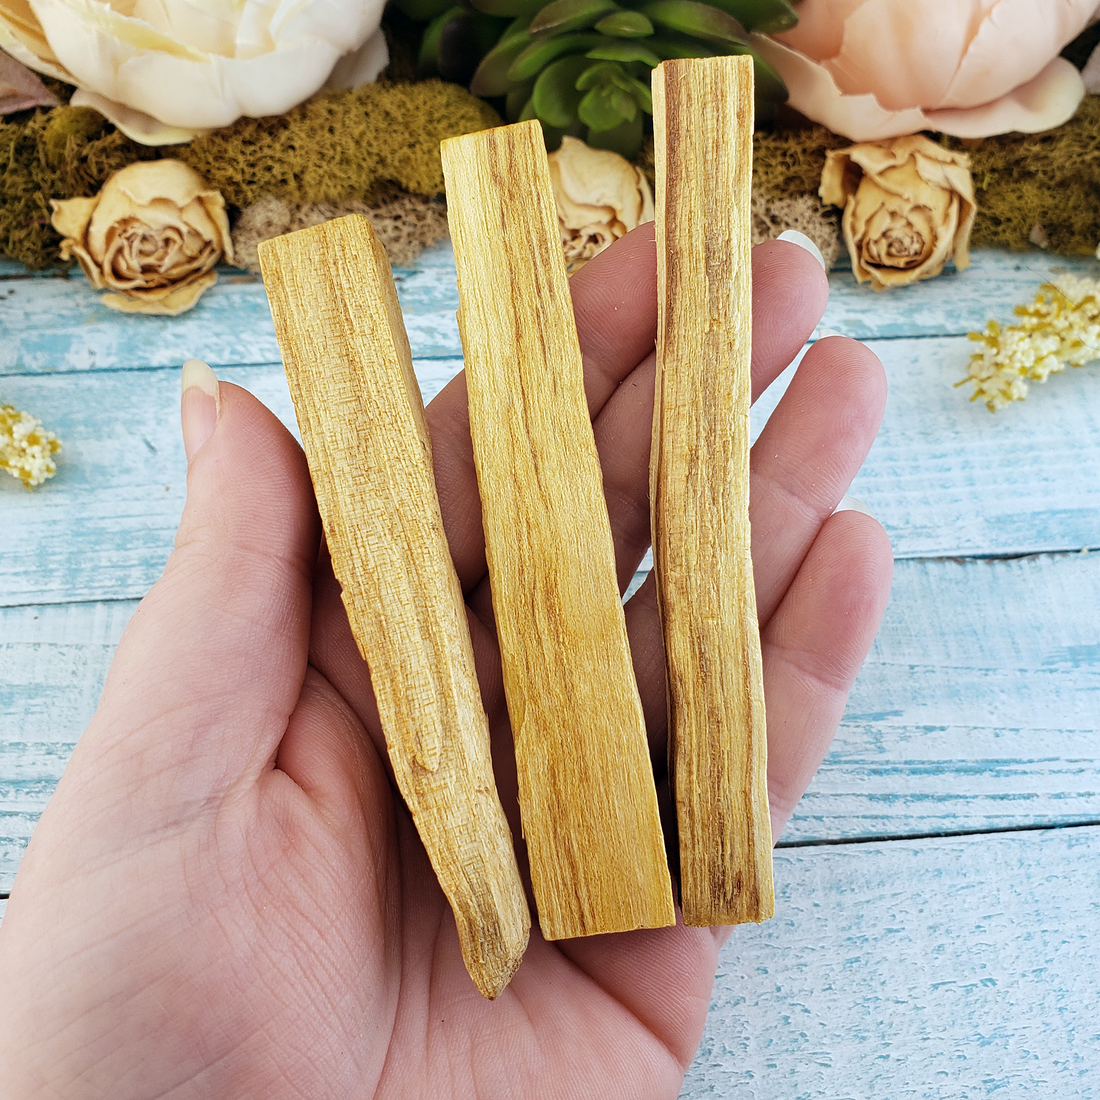 Palo Santo Stick - Wooden Smudge Stick for Cleansing - One Stick - In Hand